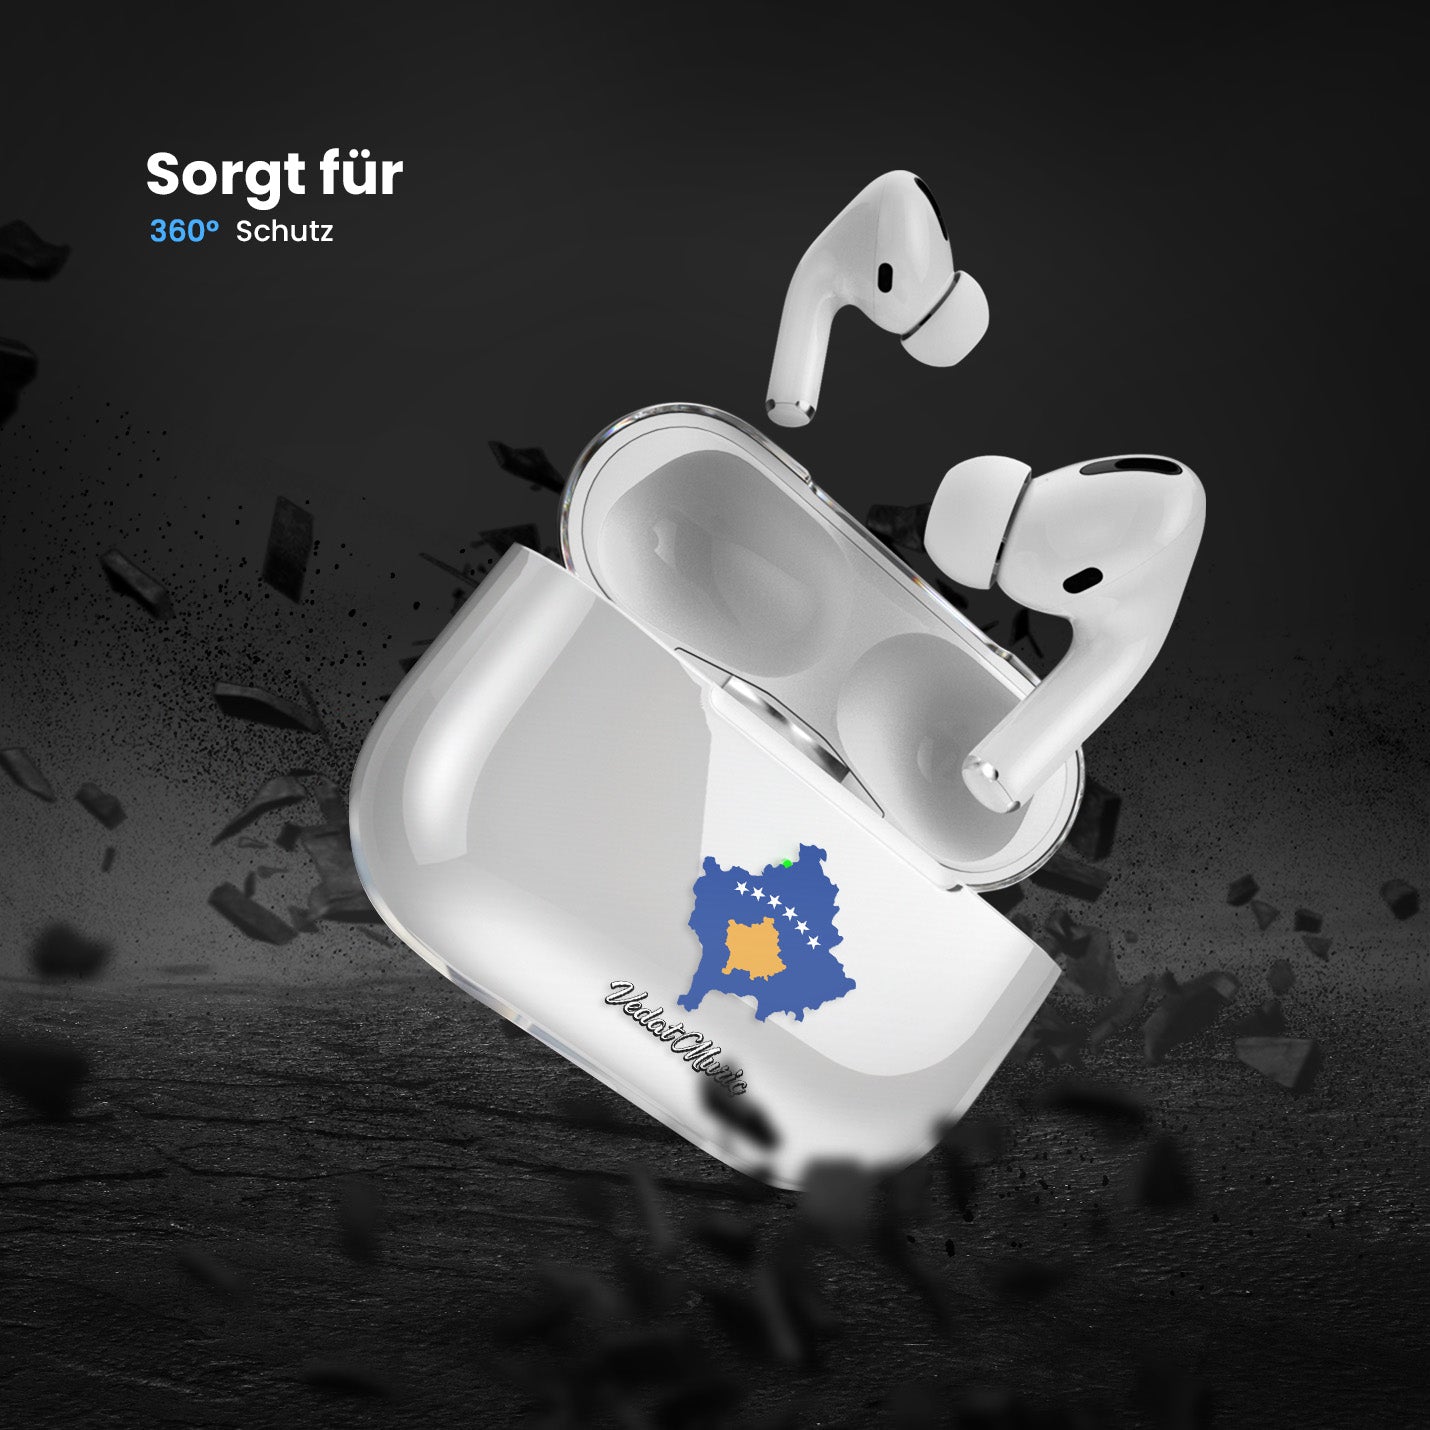 Airpods Hülle - Kosovo Flagge - 1instaphone